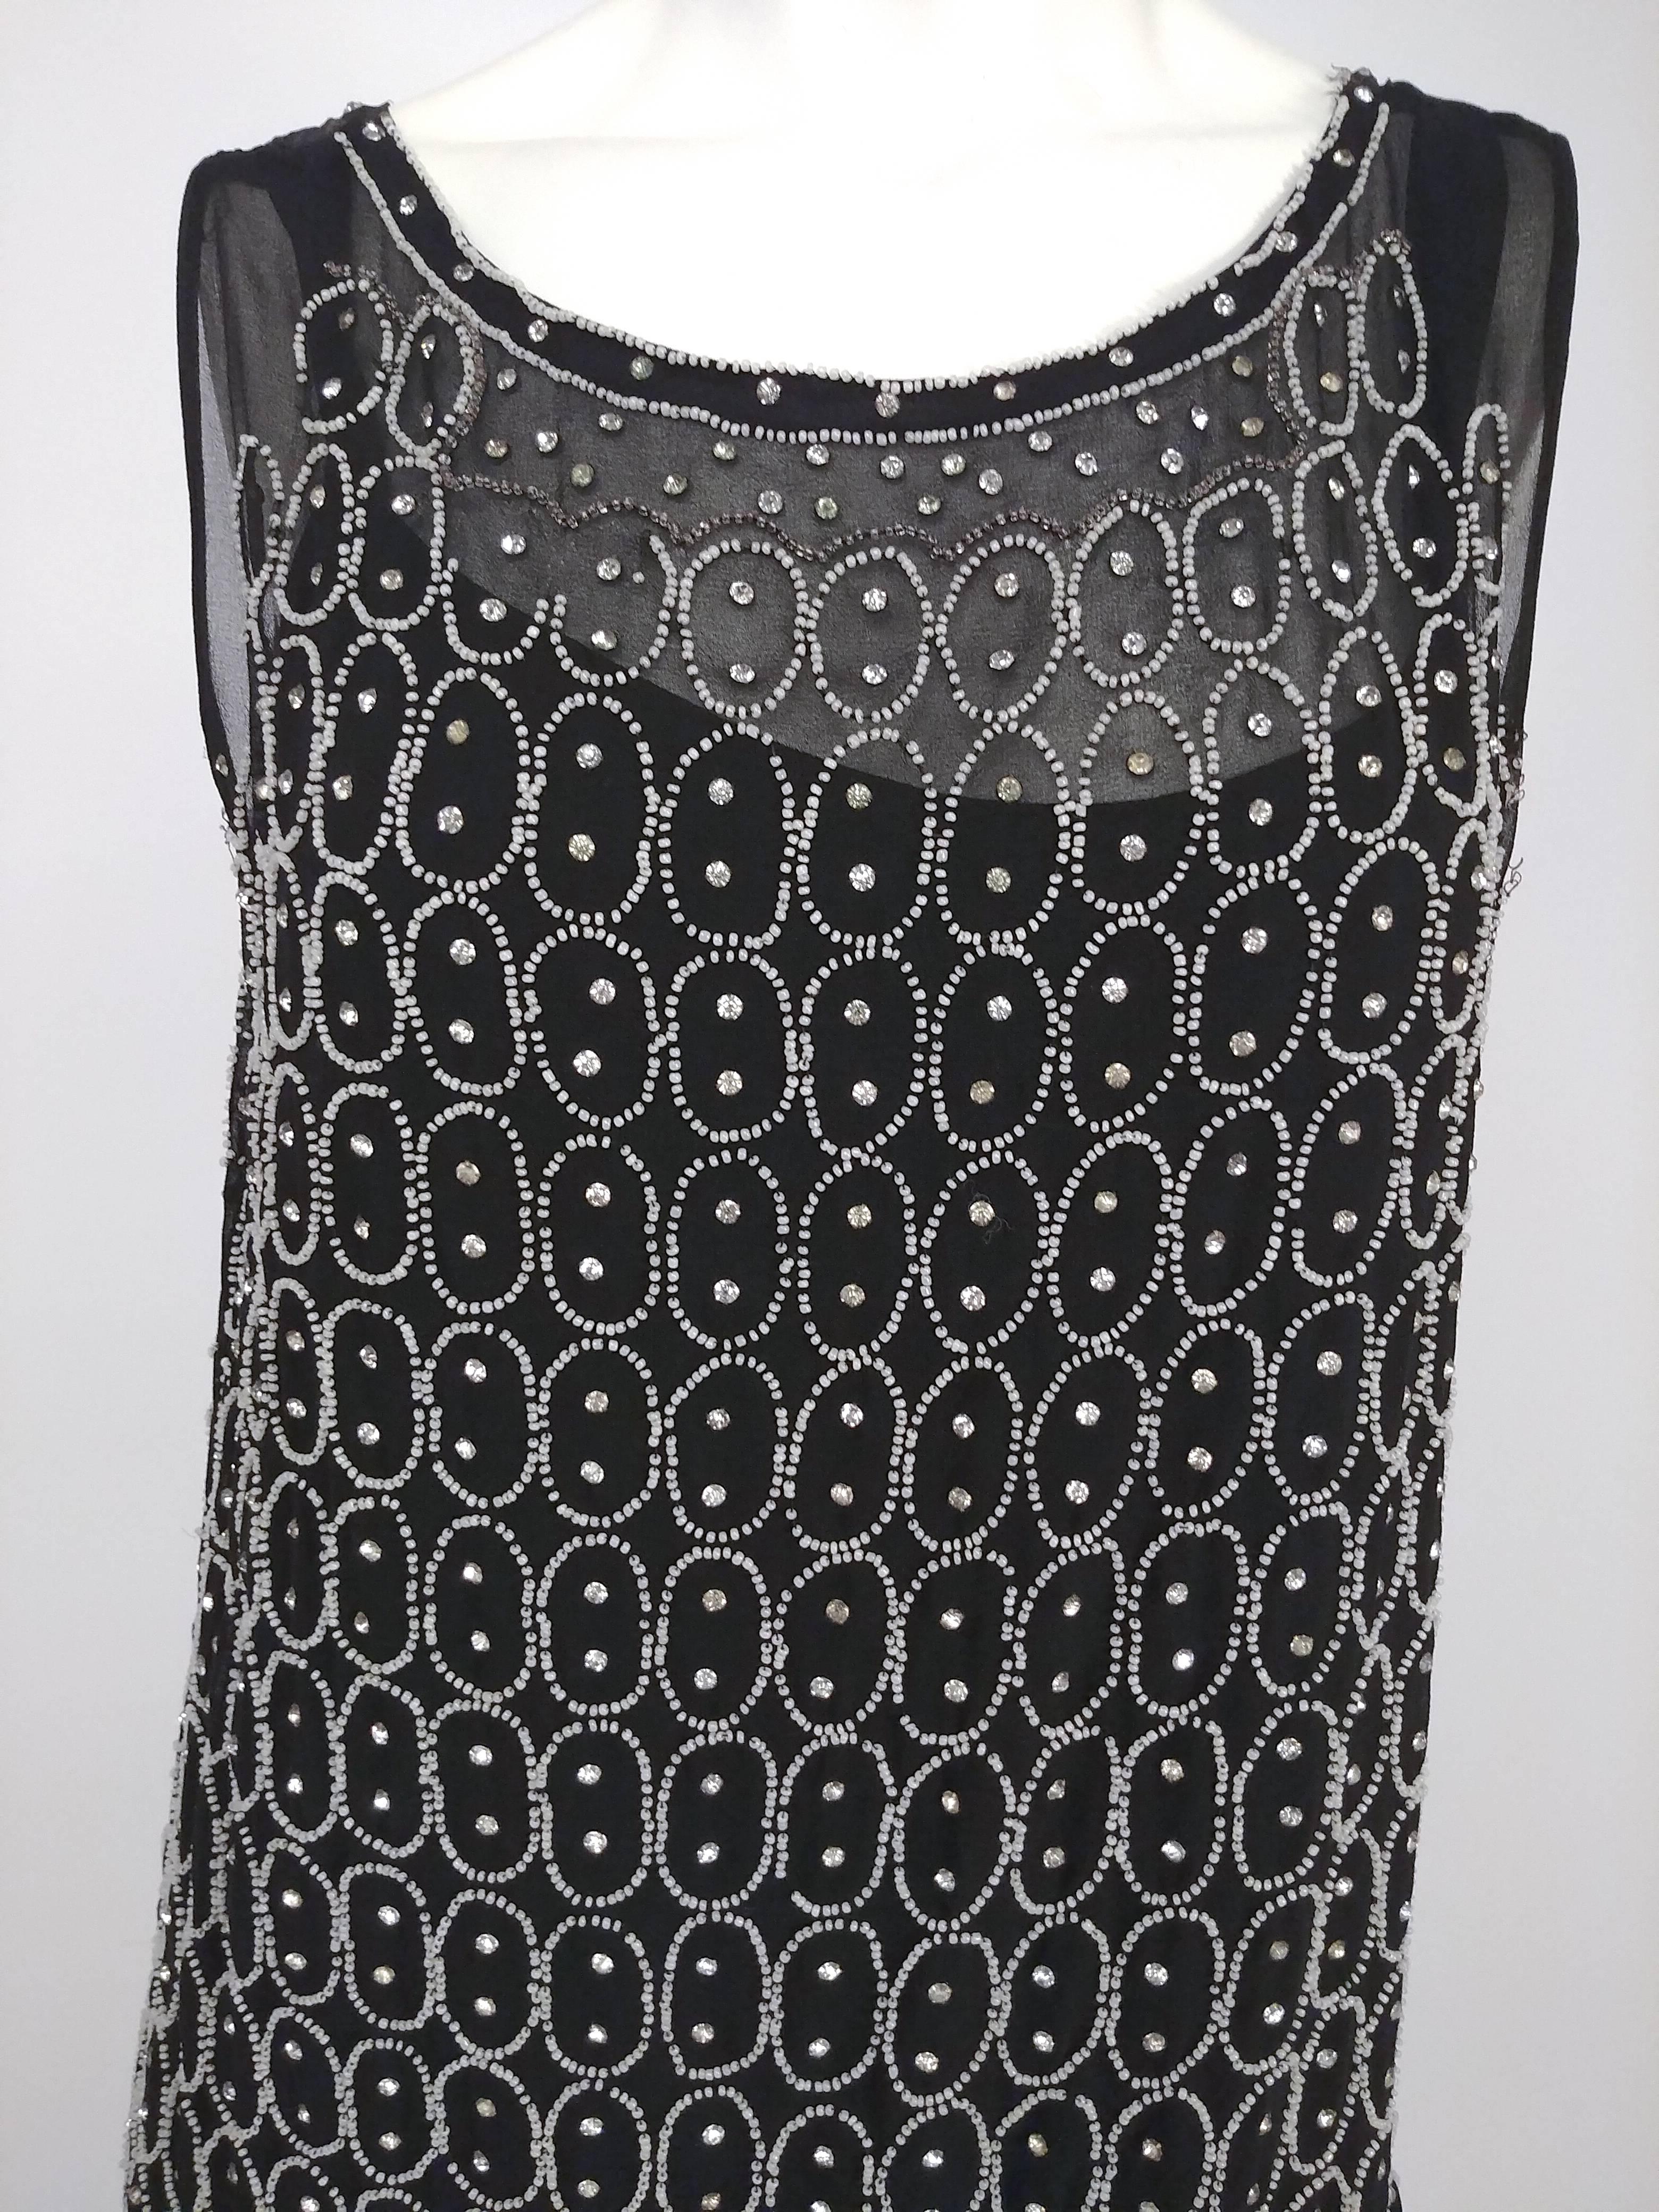 1920s Black and White Beaded Rhinestone Silk Chiffon Dress. Drop waist silhouette with two tier skirt. White beading with additional rhinestones in circular art nouveau design. Slips on over head, no closures. Attached slip. 